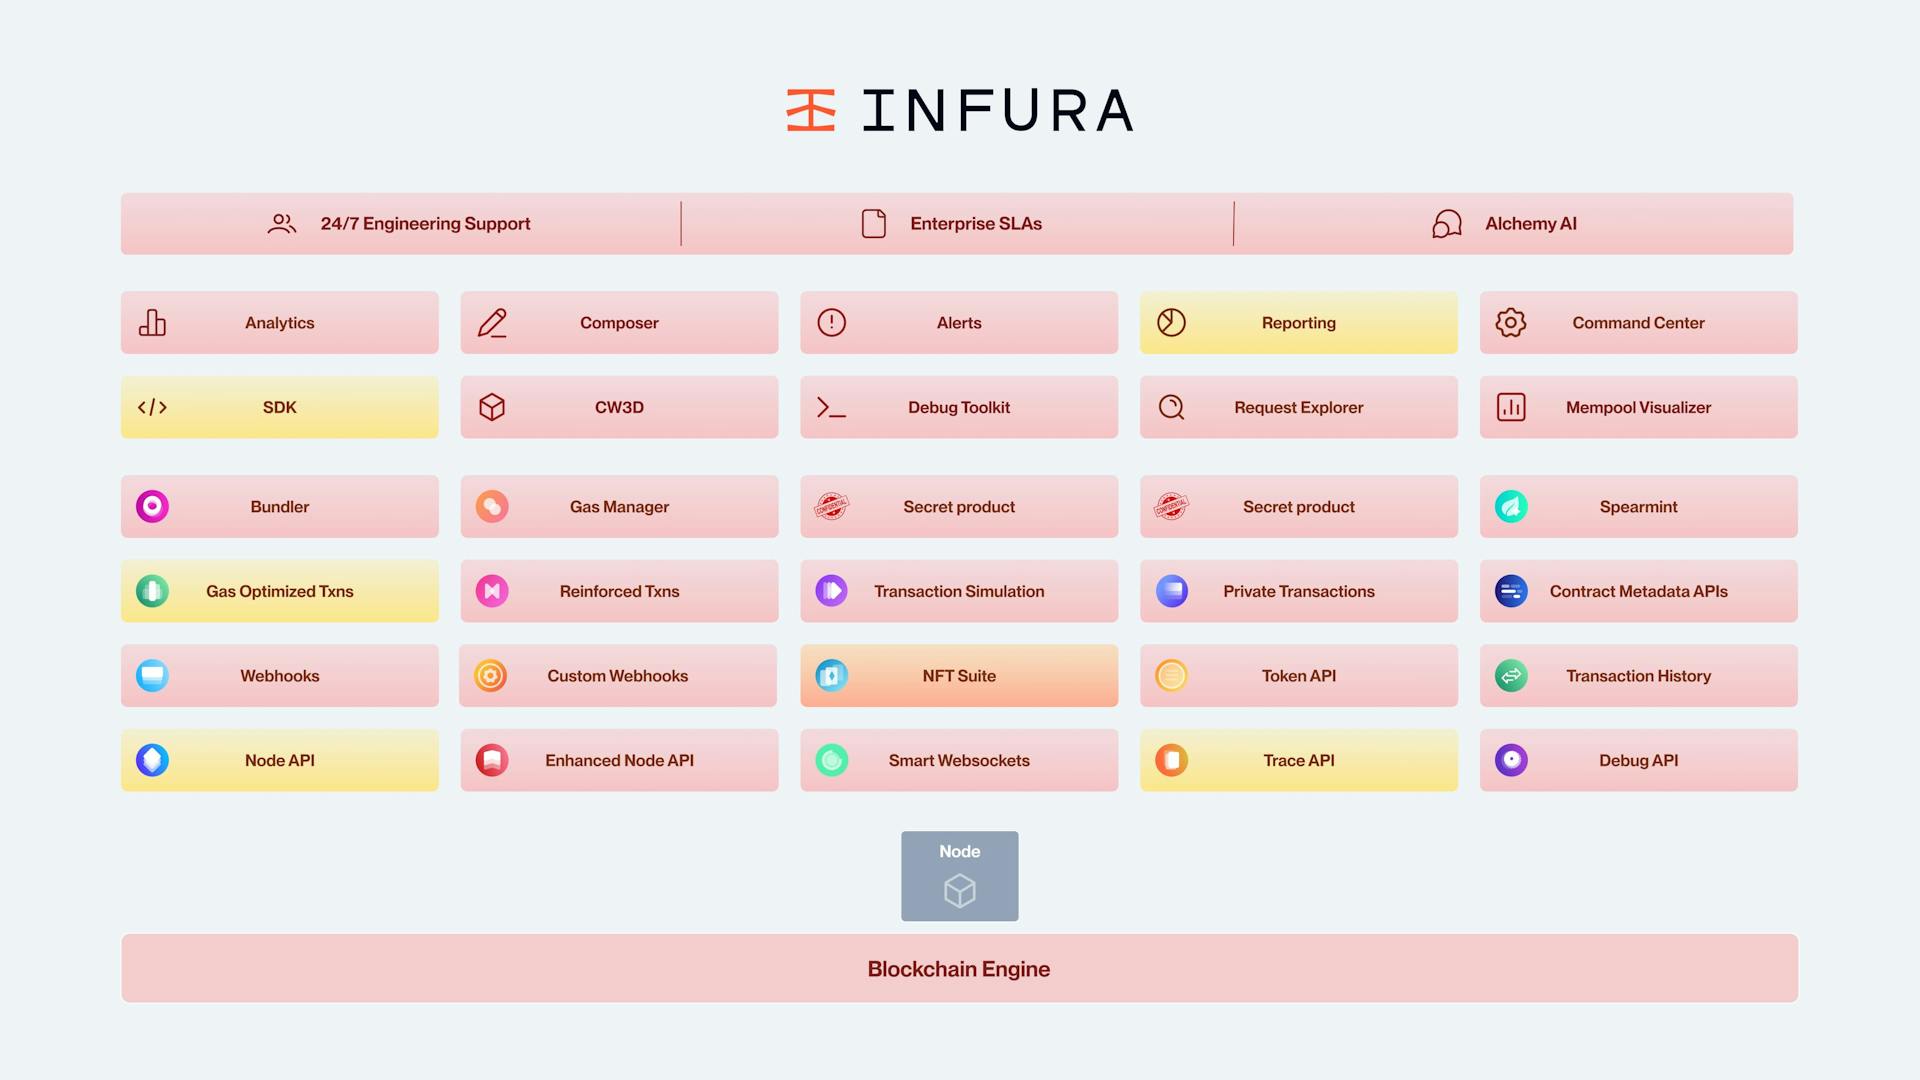 A comparison of Infura's product suite, where red boxes indicate a missing feature.